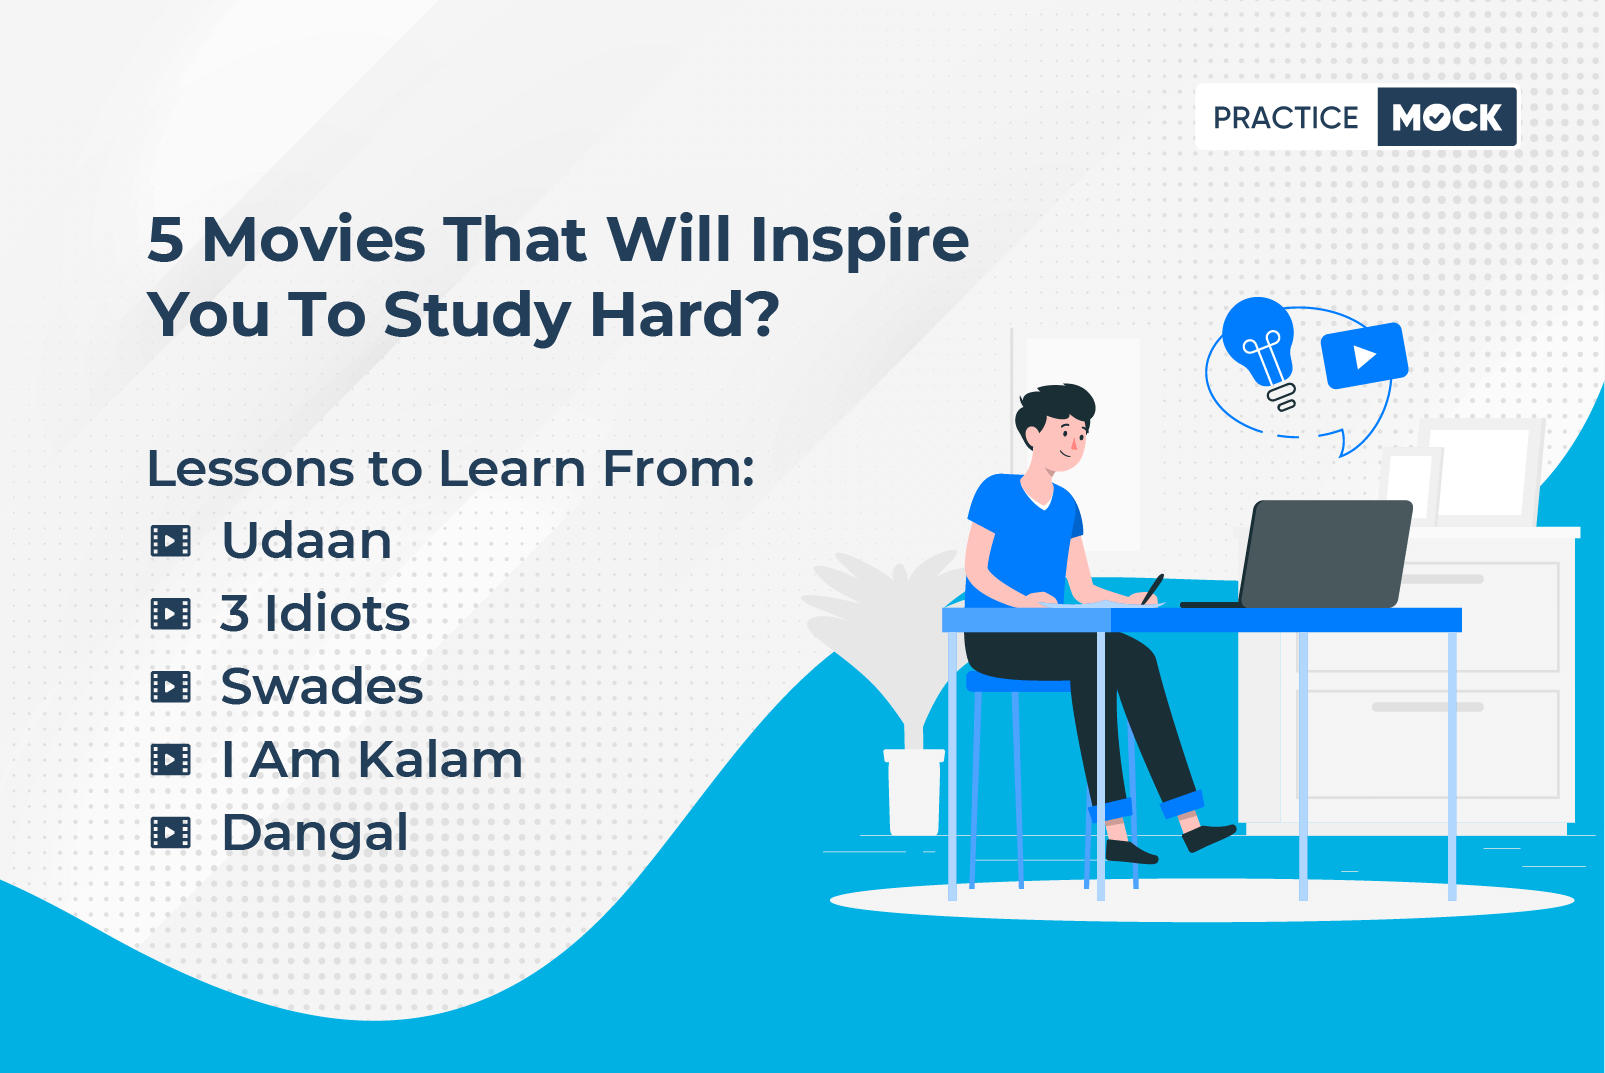 5 Bollywood Movies to inspire you to Crack IBPS & SBI Exams